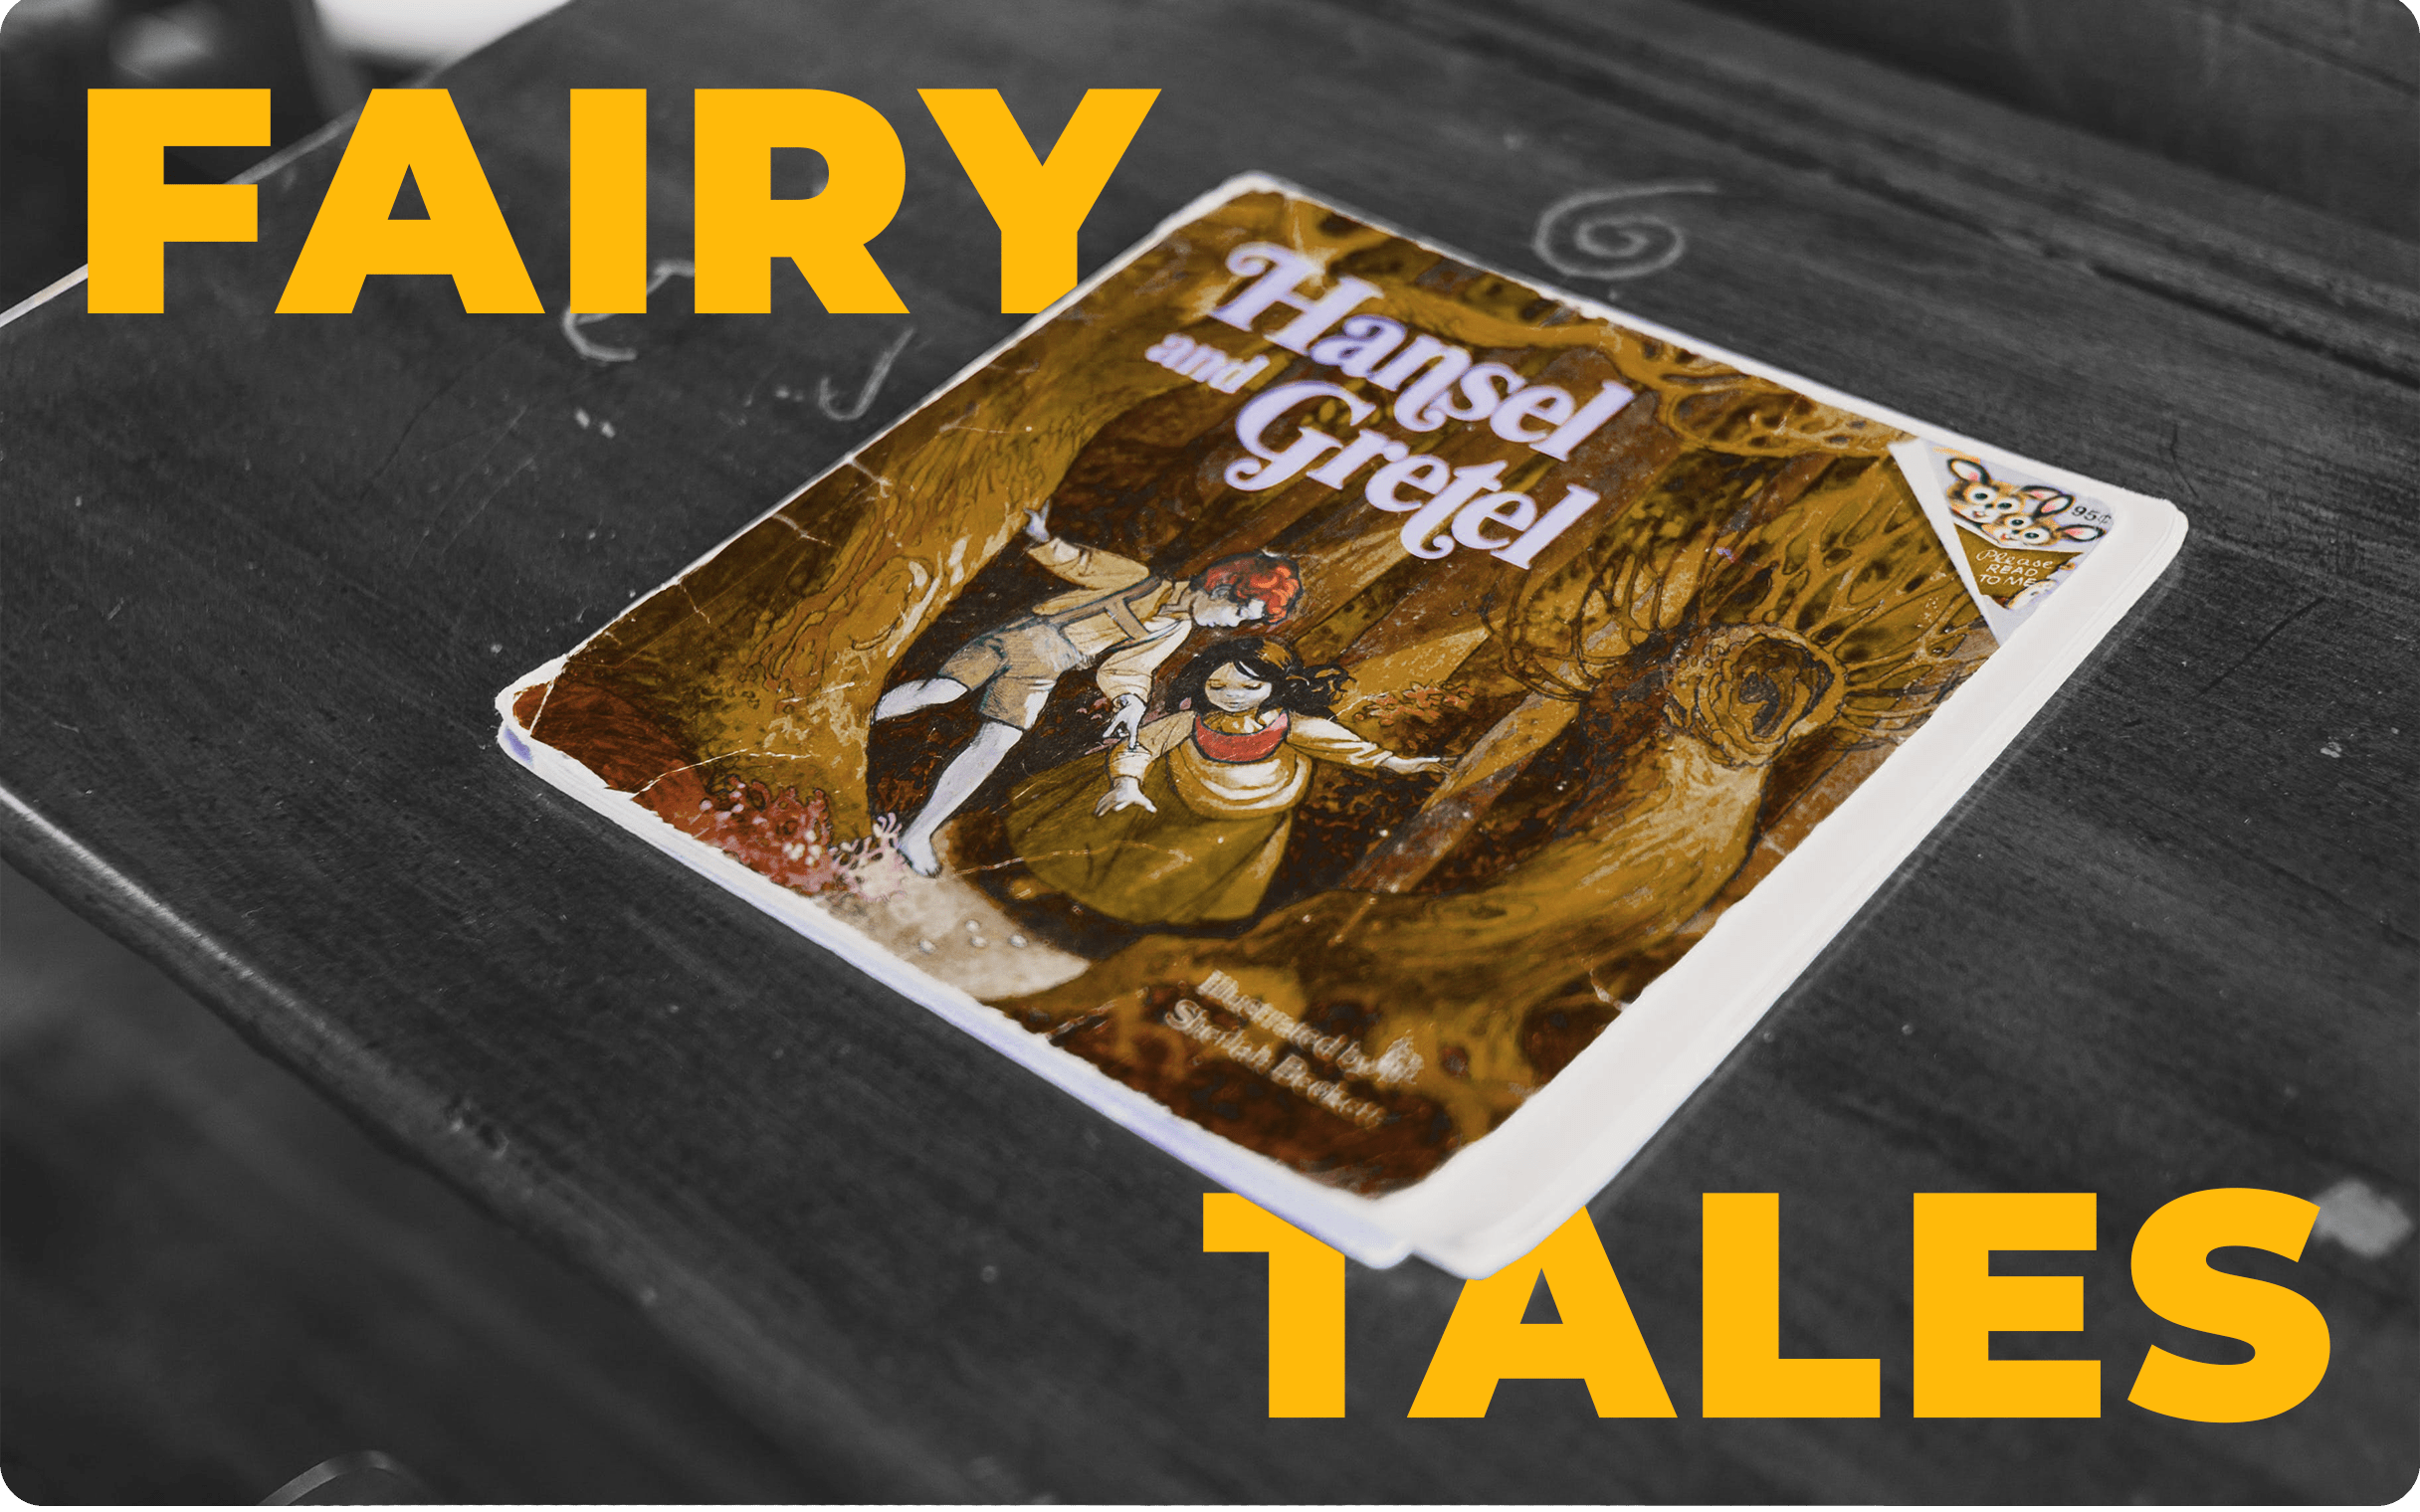 Fairy tales: The enchanting influence on English language and culture